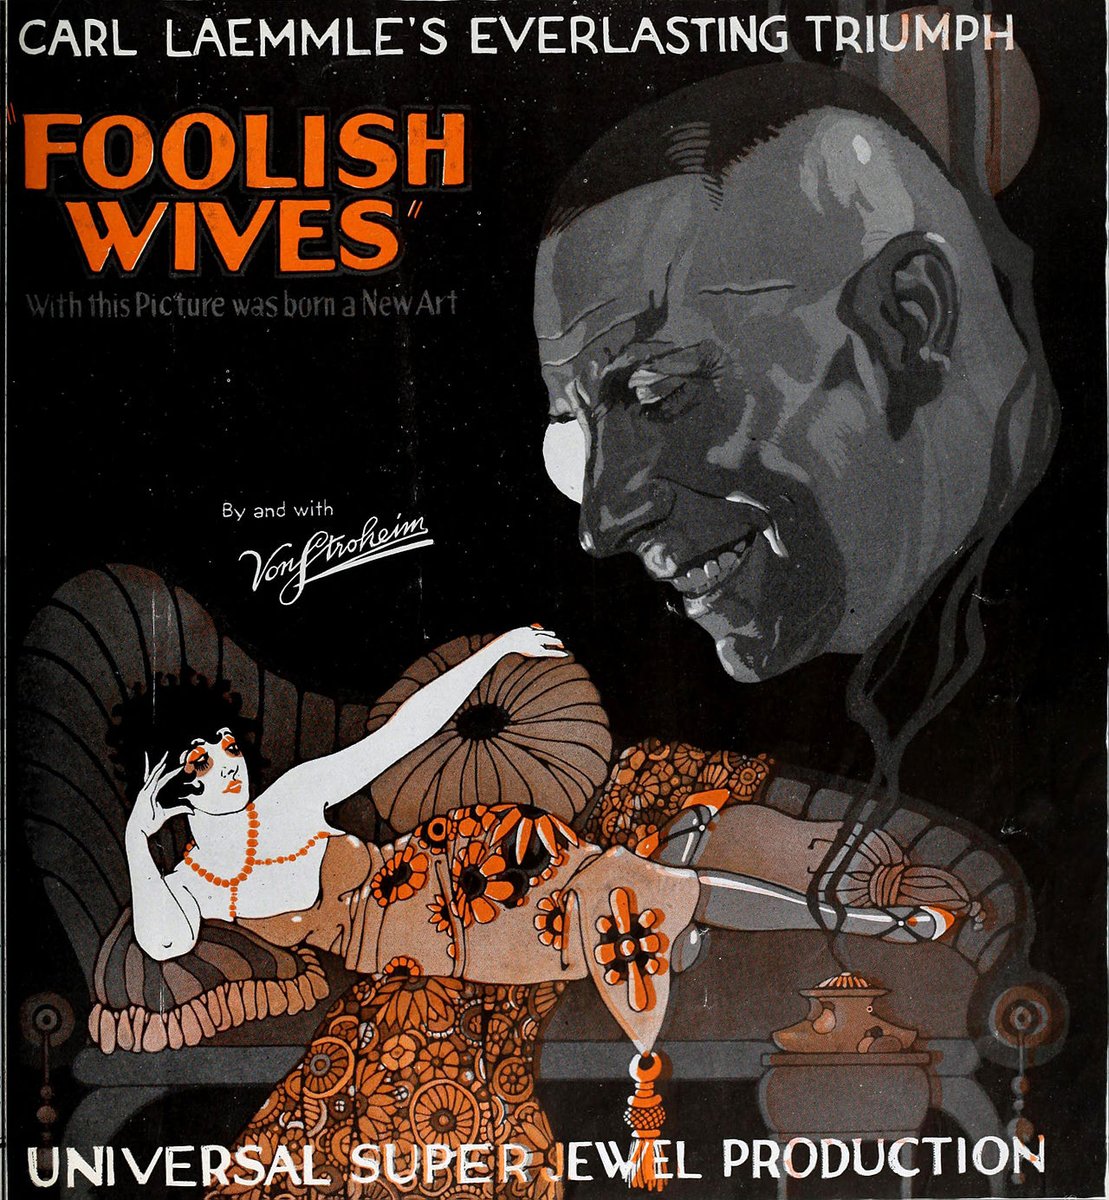 New episode! Re-restoring Von Stroheim's Foolish Wives, with Rob Byrne of @sfsilentfilm • @EddieMuller on film noir for kids and cocktail drinkers • @rwkozlowski on Bill and Myrna Becoming Nick and Nora nitrateville.com/viewtopic.php?…